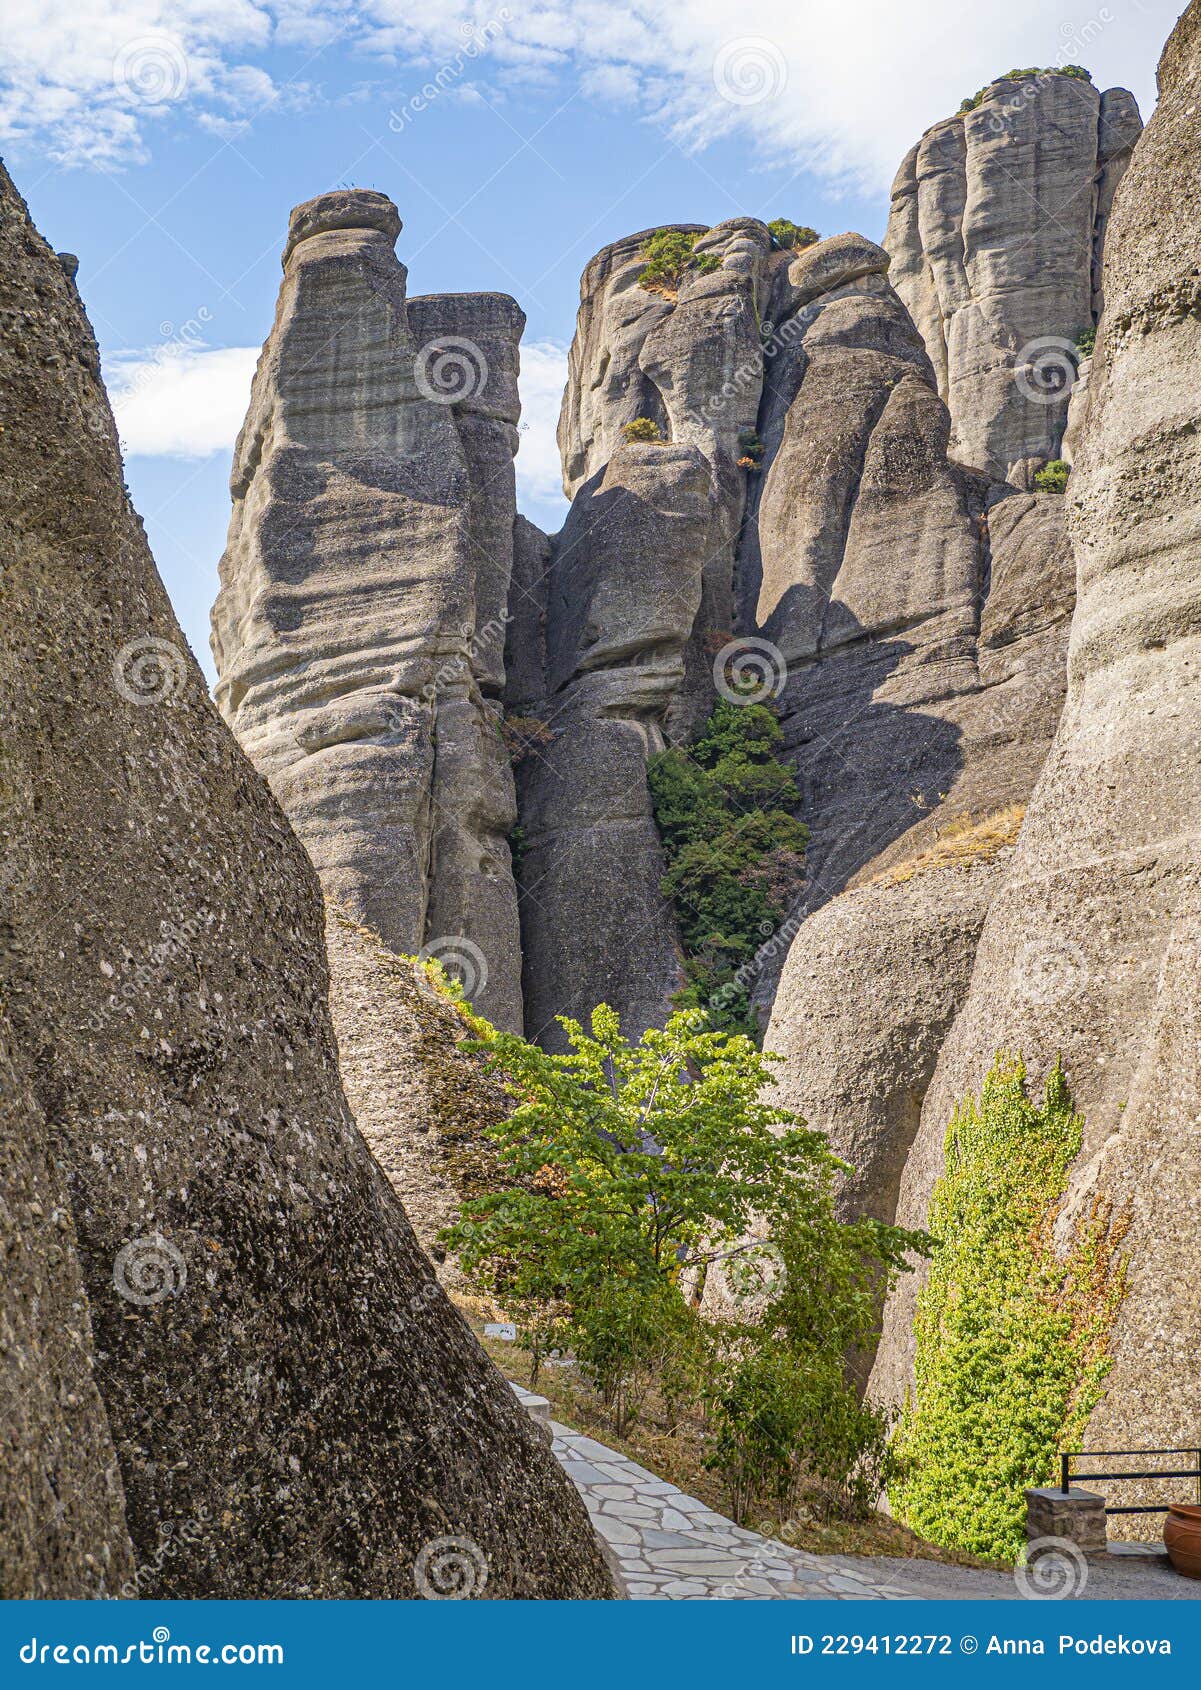 meteora cliffs landscapes. holly monasteries territory.